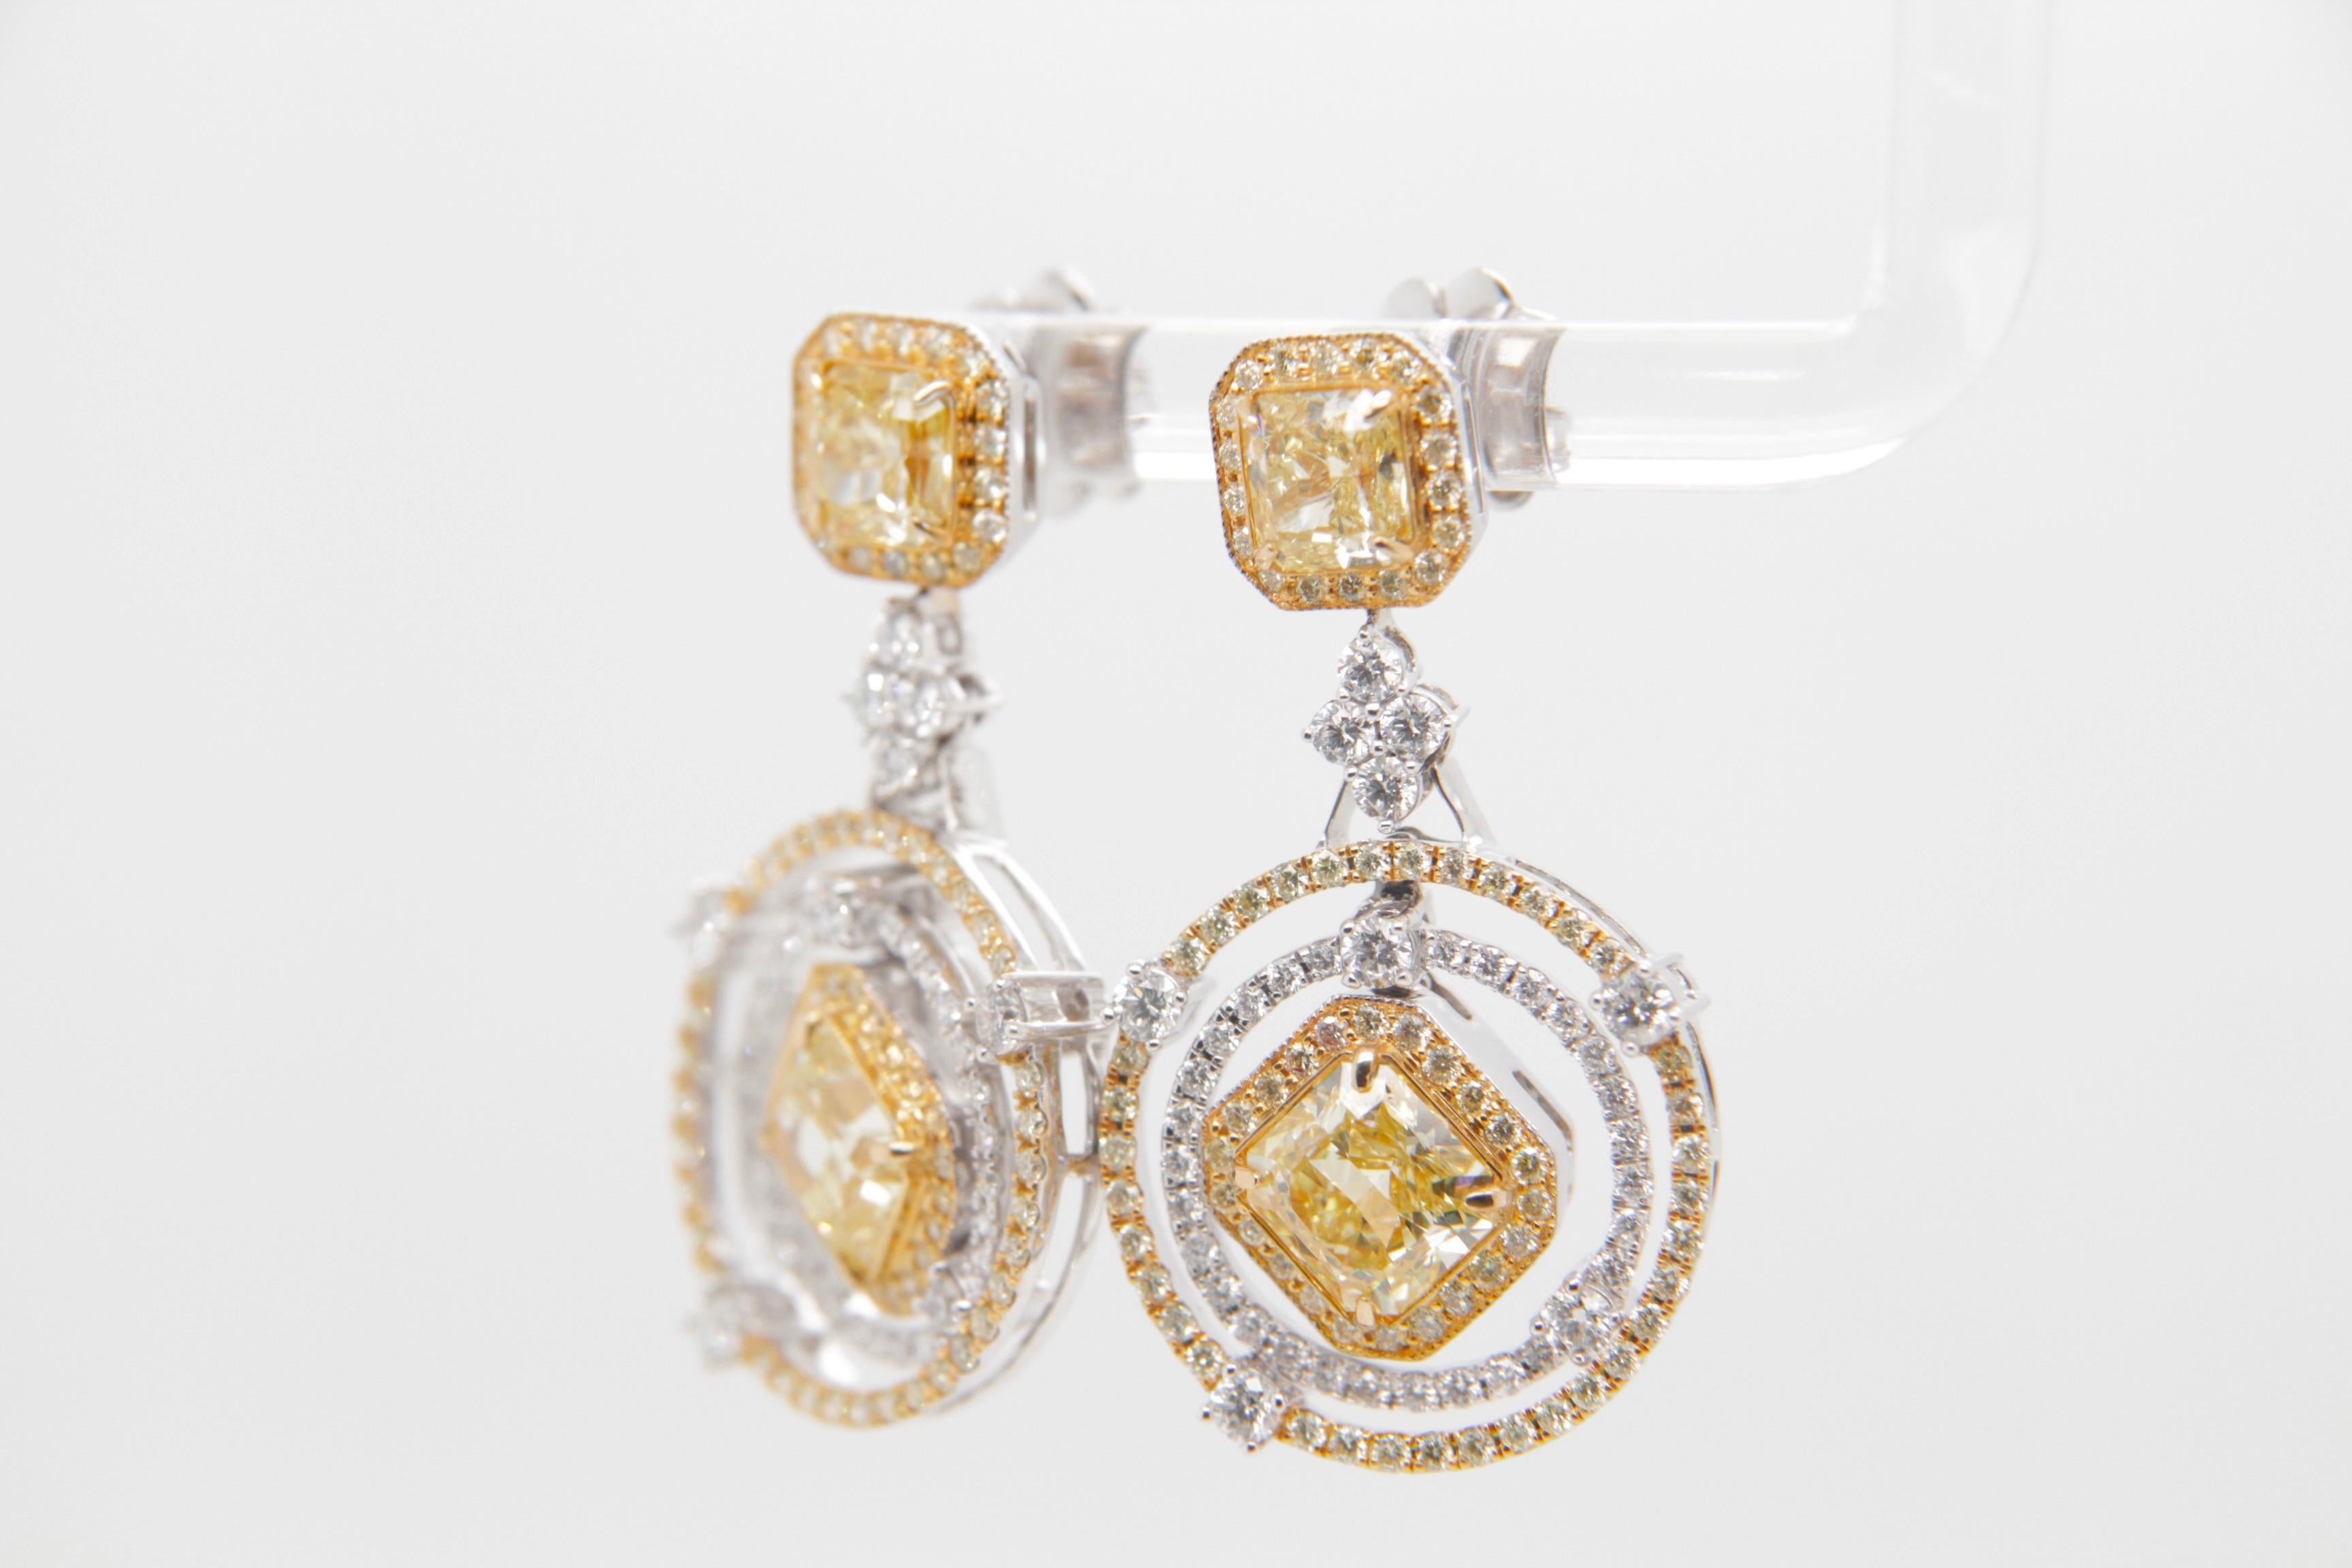 Introducing a spectacular creation from Rewa Jewelry, these diamond earrings are a true masterpiece, showcasing the brand's dedication to exceptional craftsmanship and unparalleled beauty.

At the heart of these earrings are four dazzling diamonds,